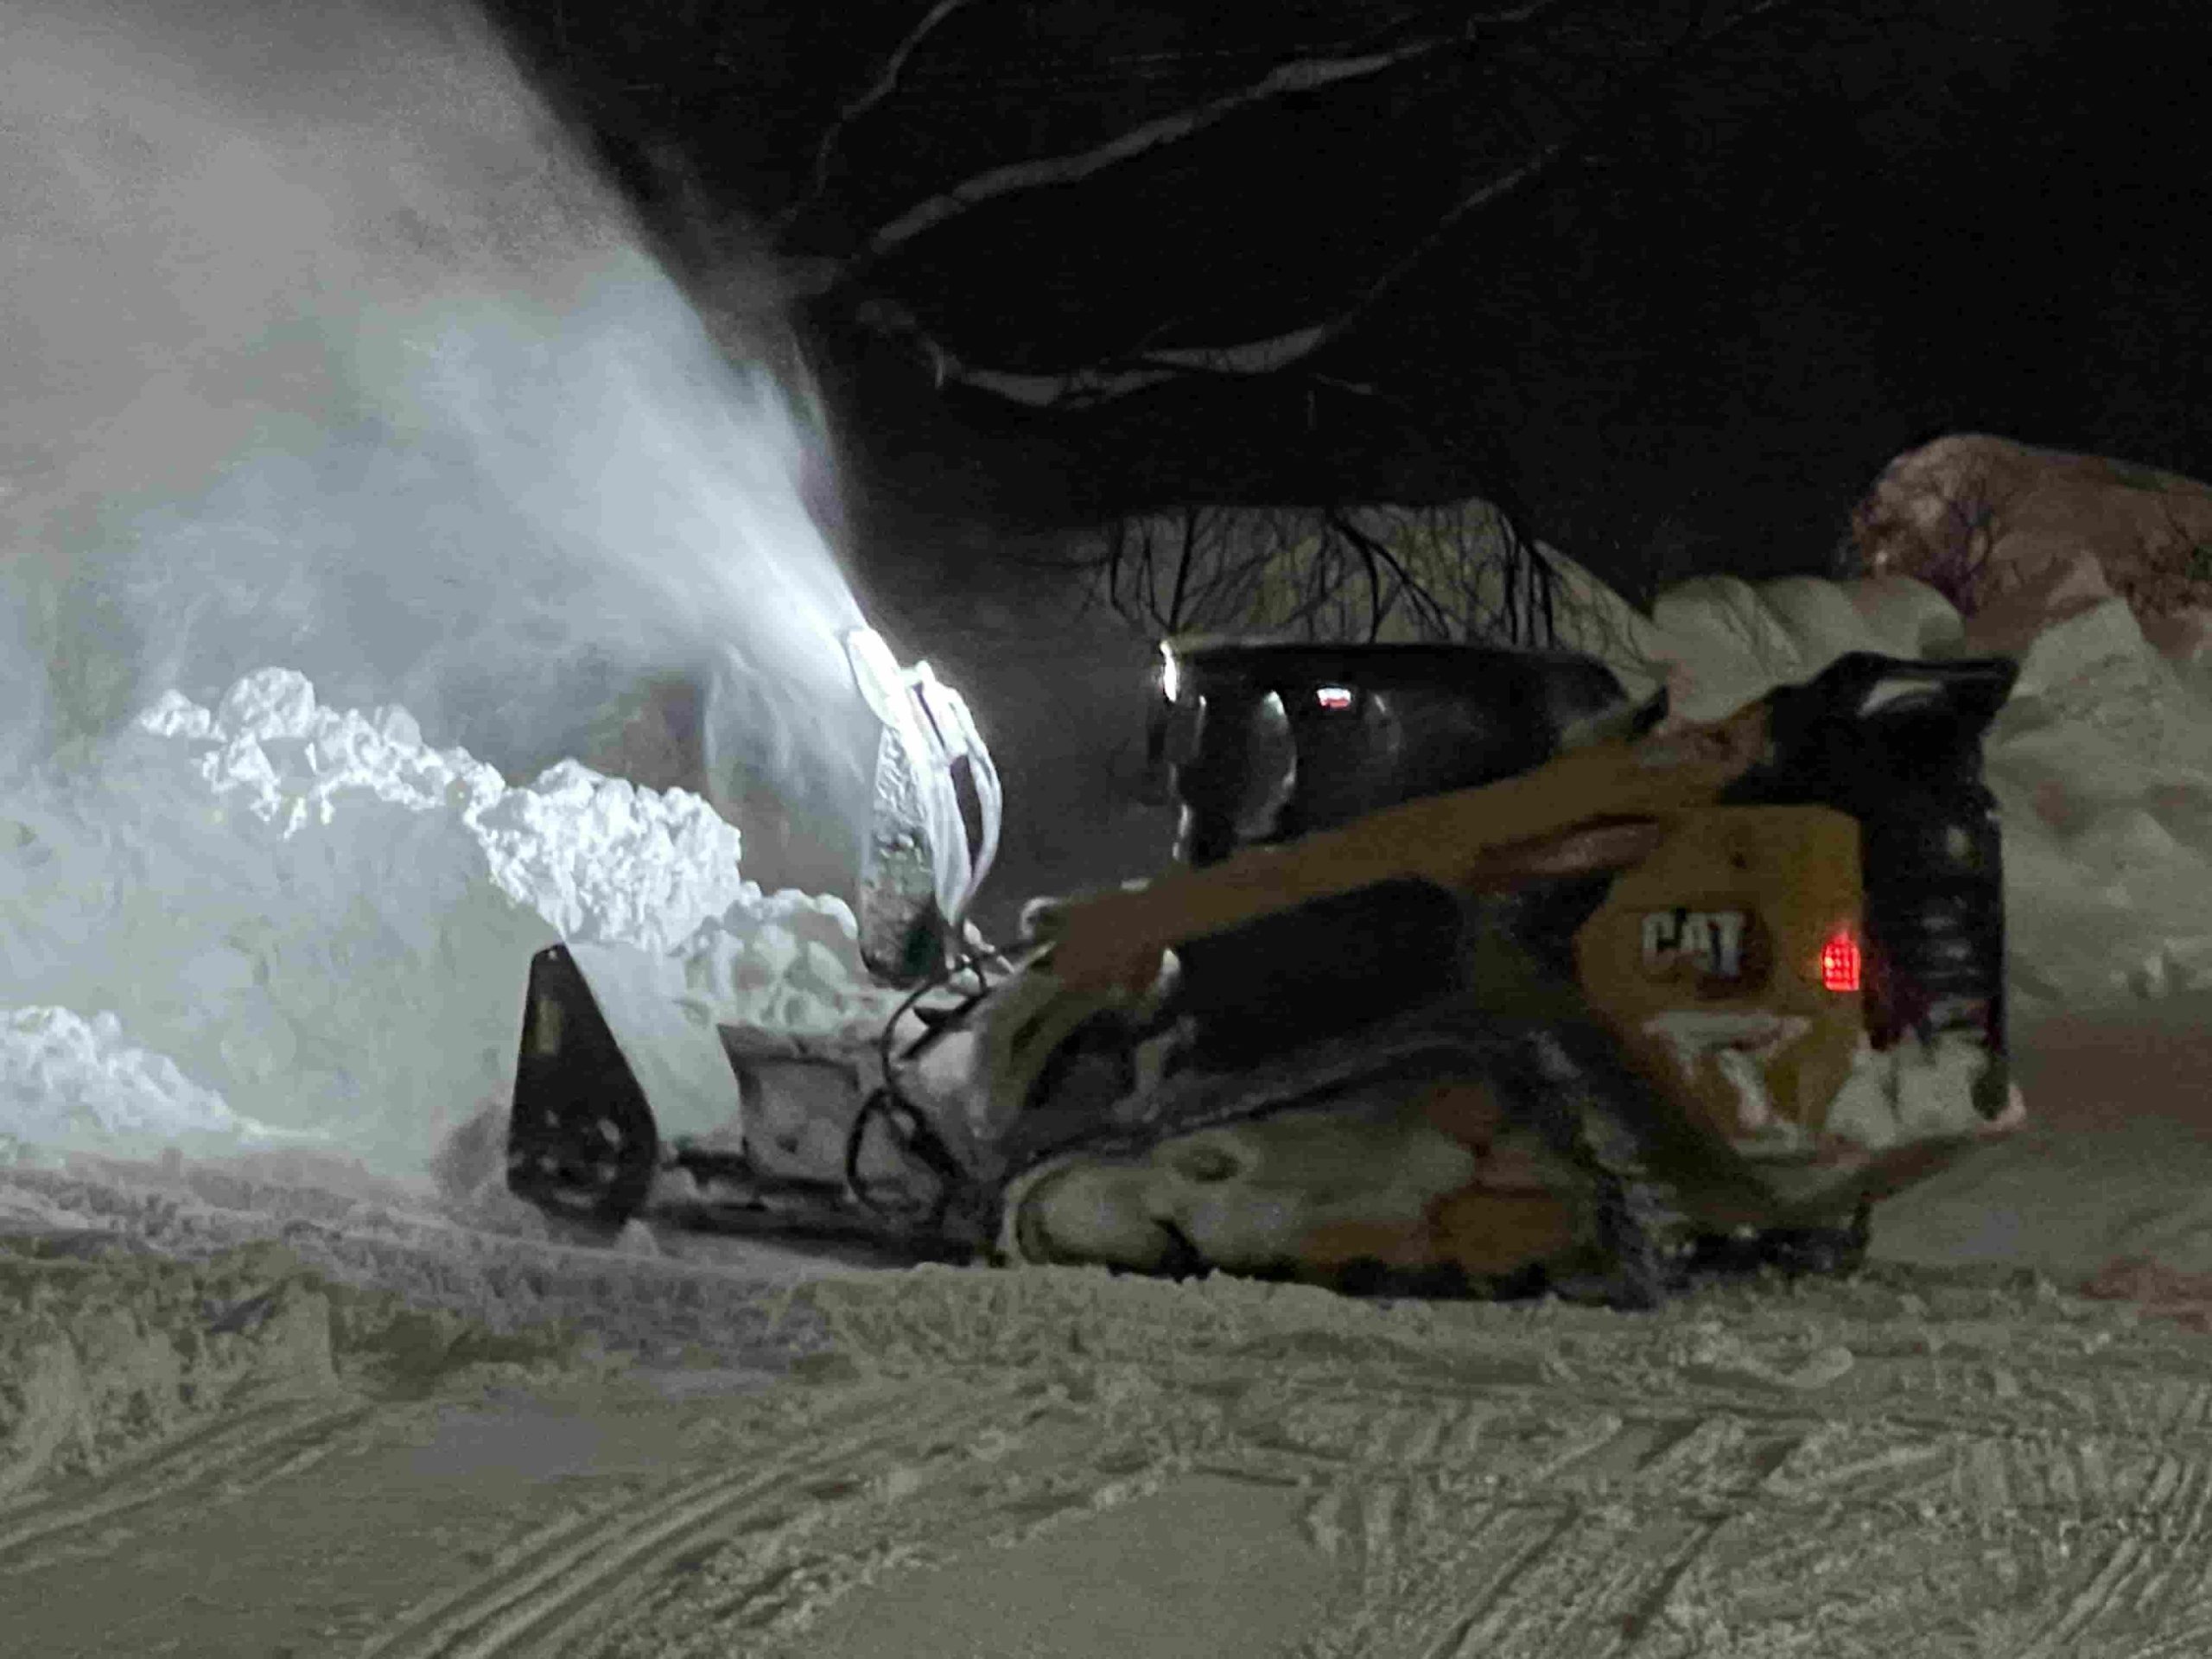 A powerful CAT skid steer loader is at work for snow removal.